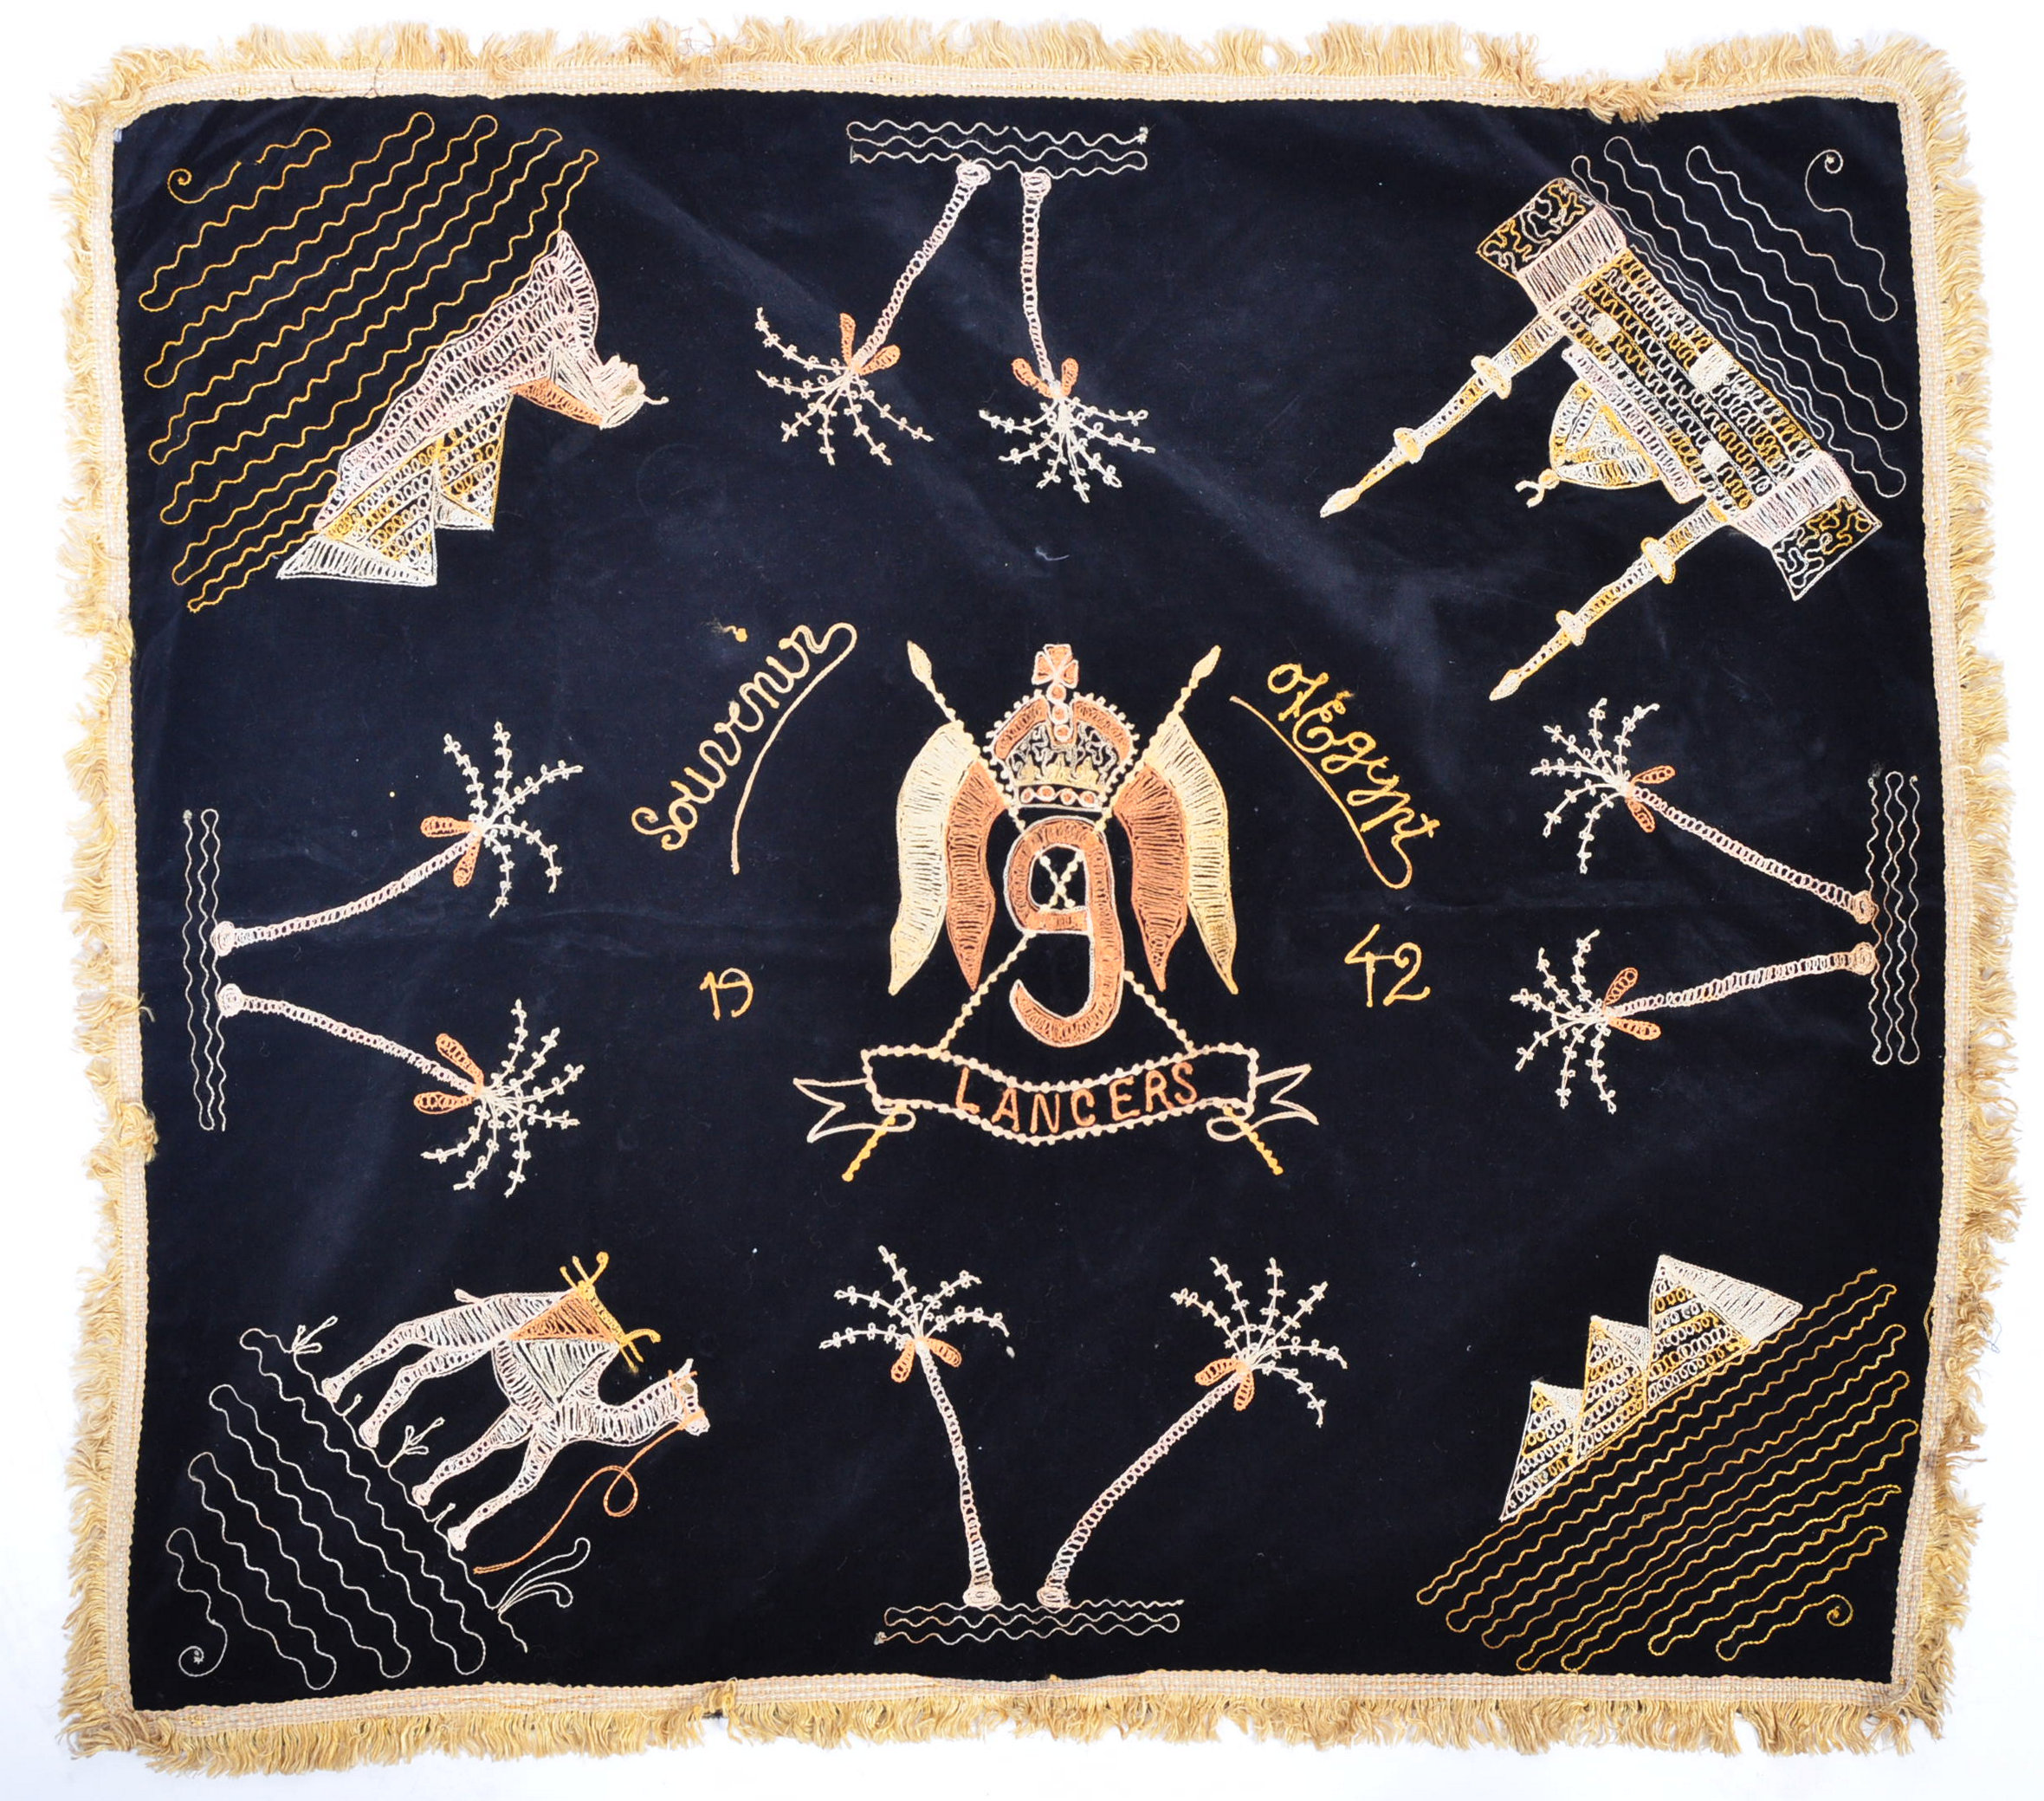 WWII 9TH LANCERS SOUVENIR OF EGYPT EMBROIDERY